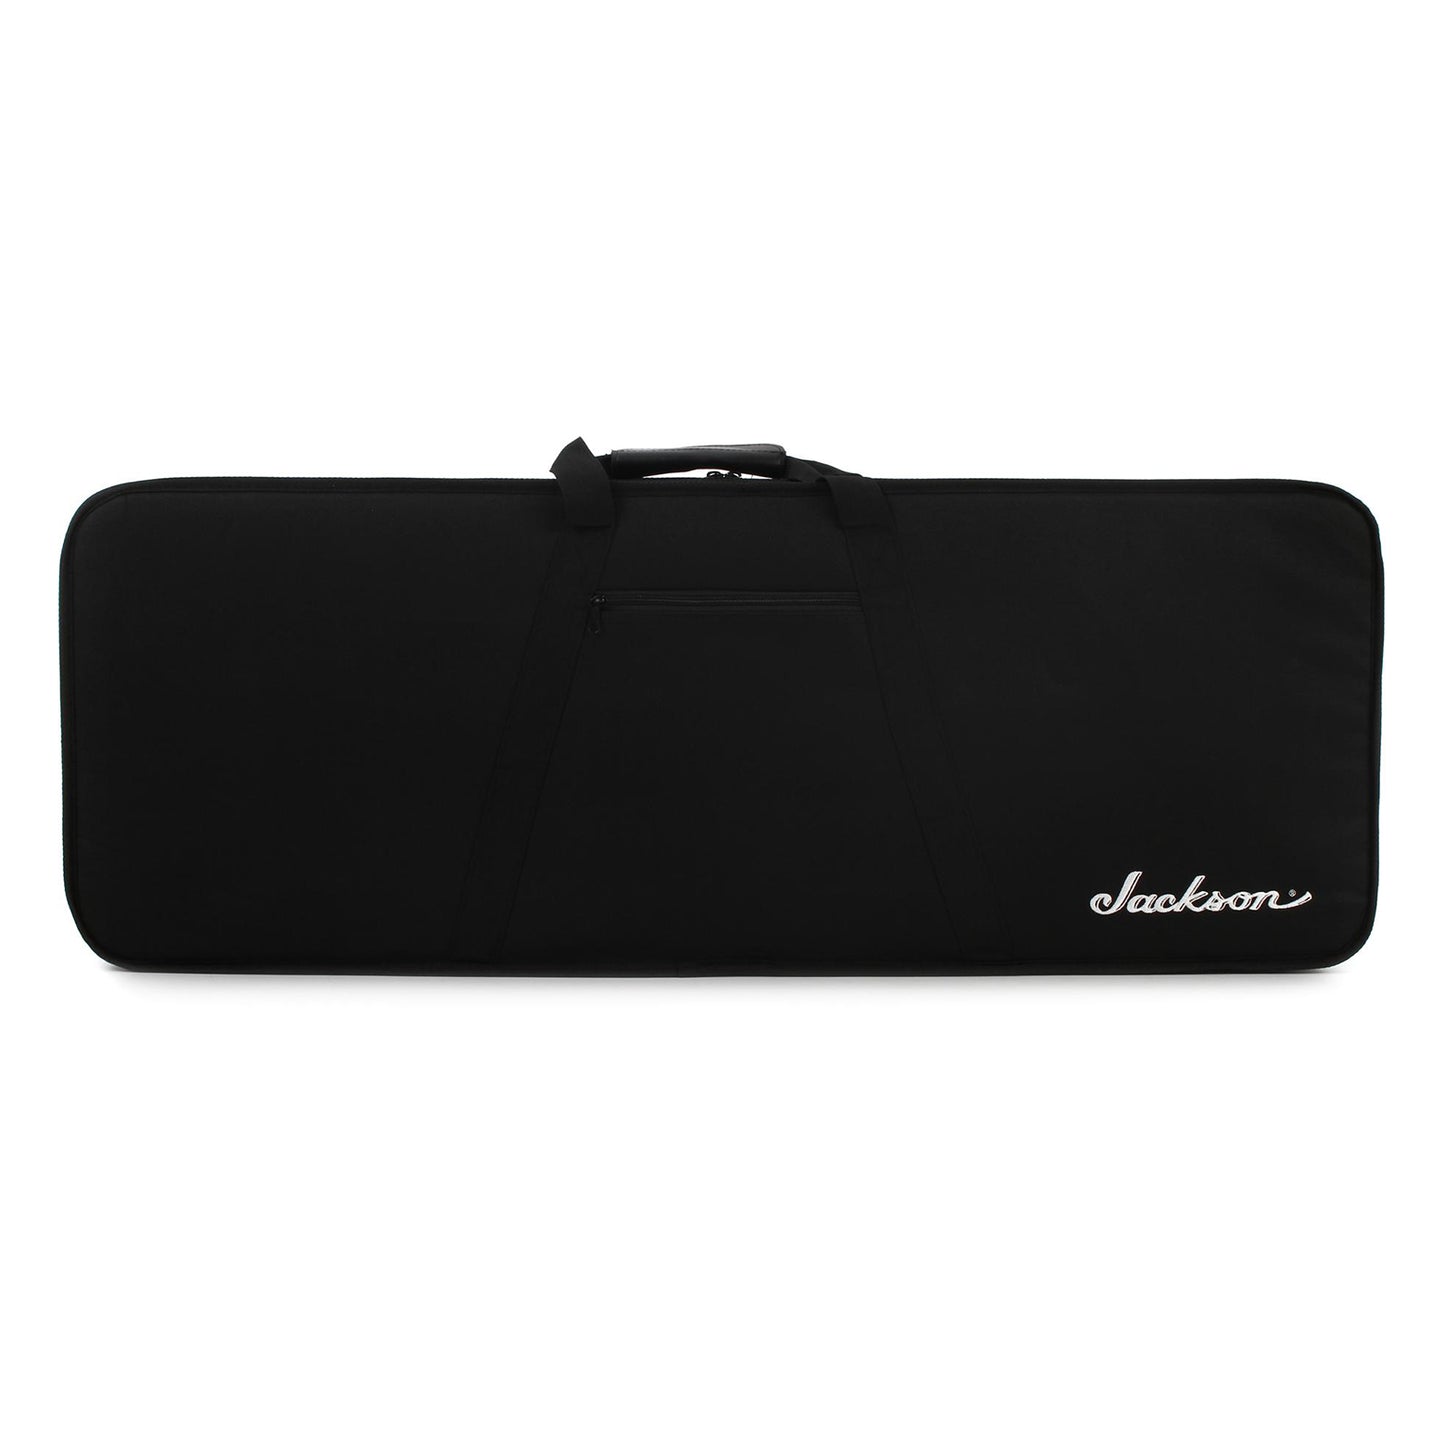 Jackson Soloist Dinky Hardshell Electric Guitar Gig Bag Foam Interior Hard Case with Storage Compartments, Dual Handles